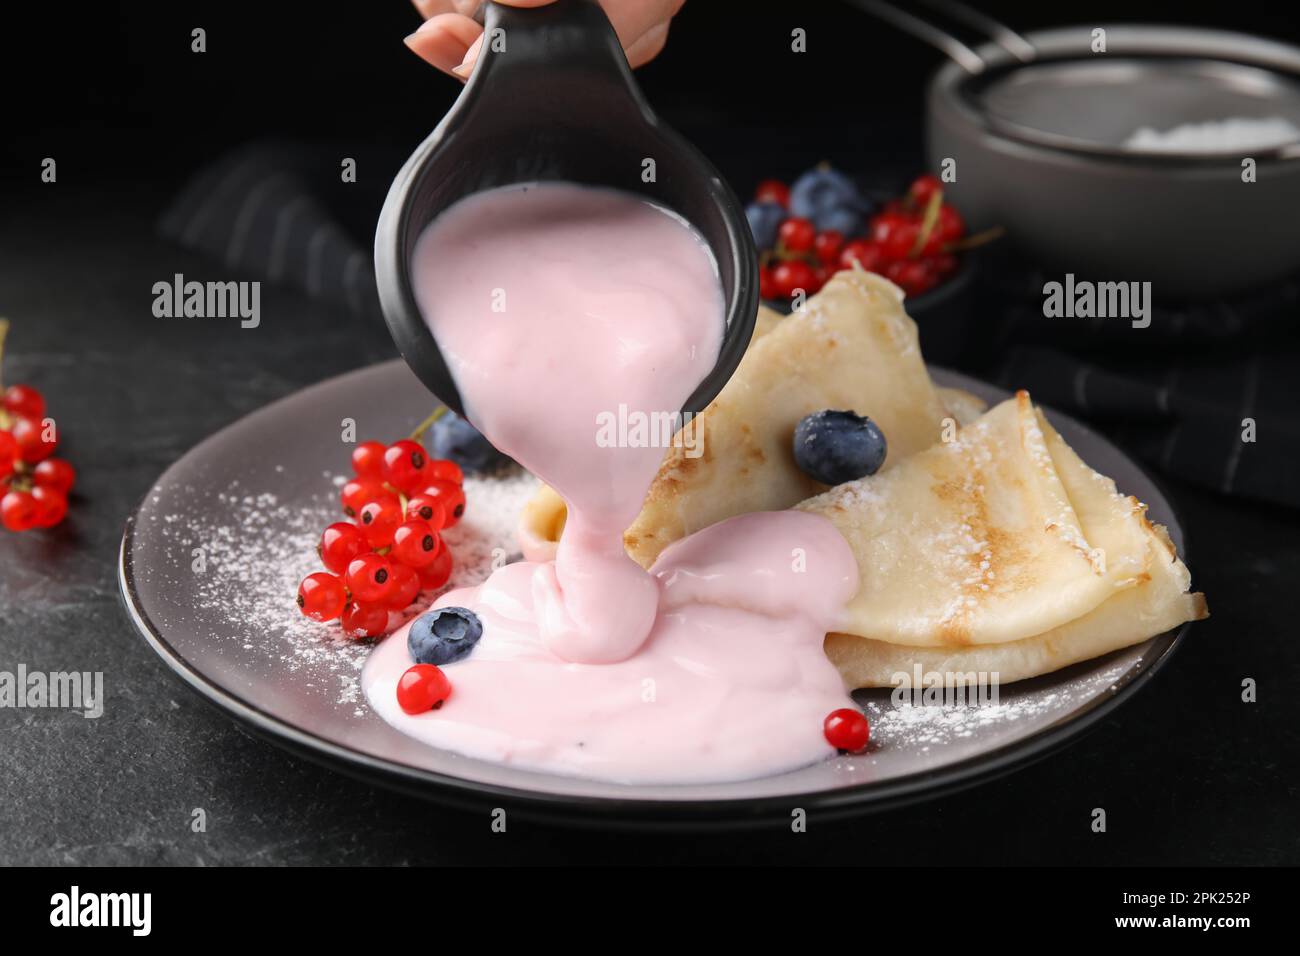 Woman pouring natural yogurt onto crepes with blueberries and red currants at table, closeup Stock Photo